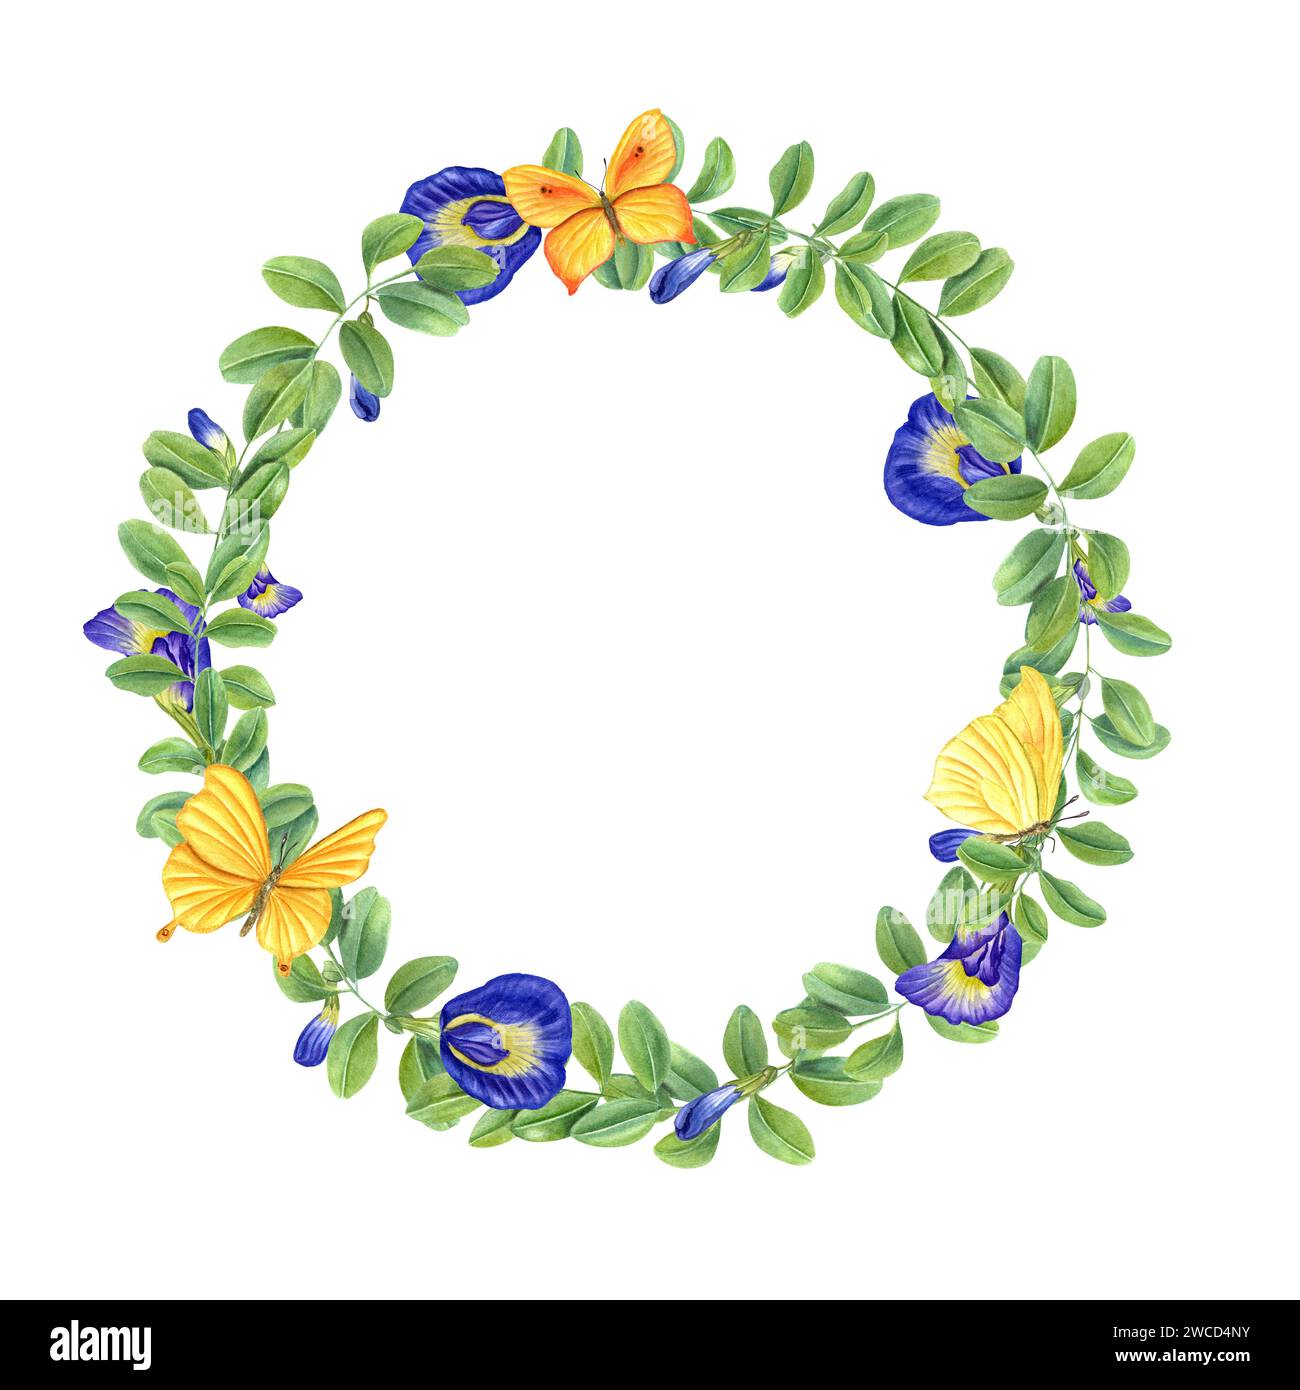 Wreath of blue wisteria and yellow butterflies. Clitoria ternatea, Fluttering lepidoptera. Green leaves, flowers, buds. Blooming branches Stock Photo